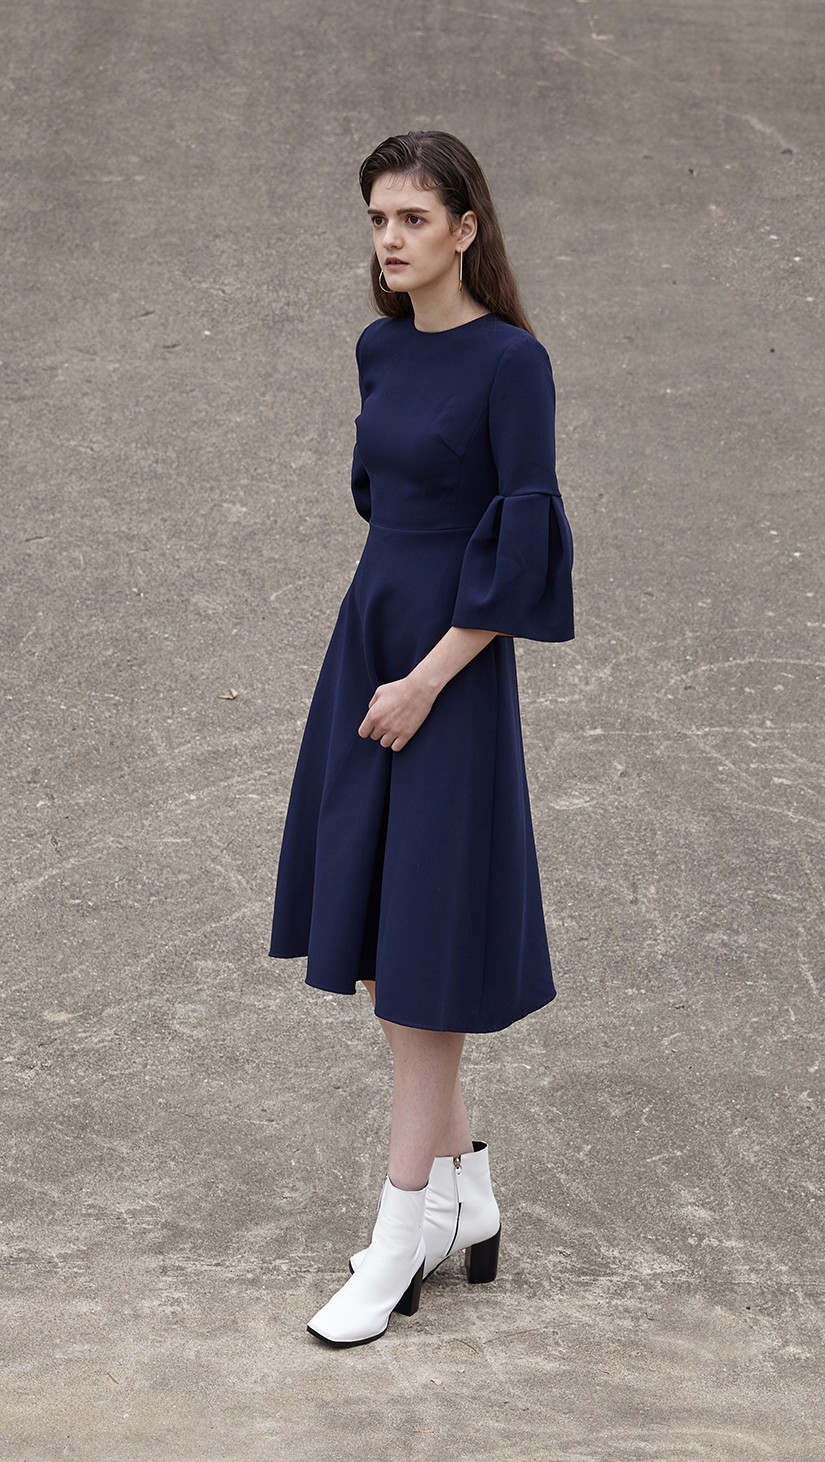 Roxette Dress in navy. With a voluminous flounce sleeves in 3/4 length, round neckline, silk blend insert in contacting collar - bold orange. Below-the-knee length. Hidden zip closure along back. A-line silhouette.